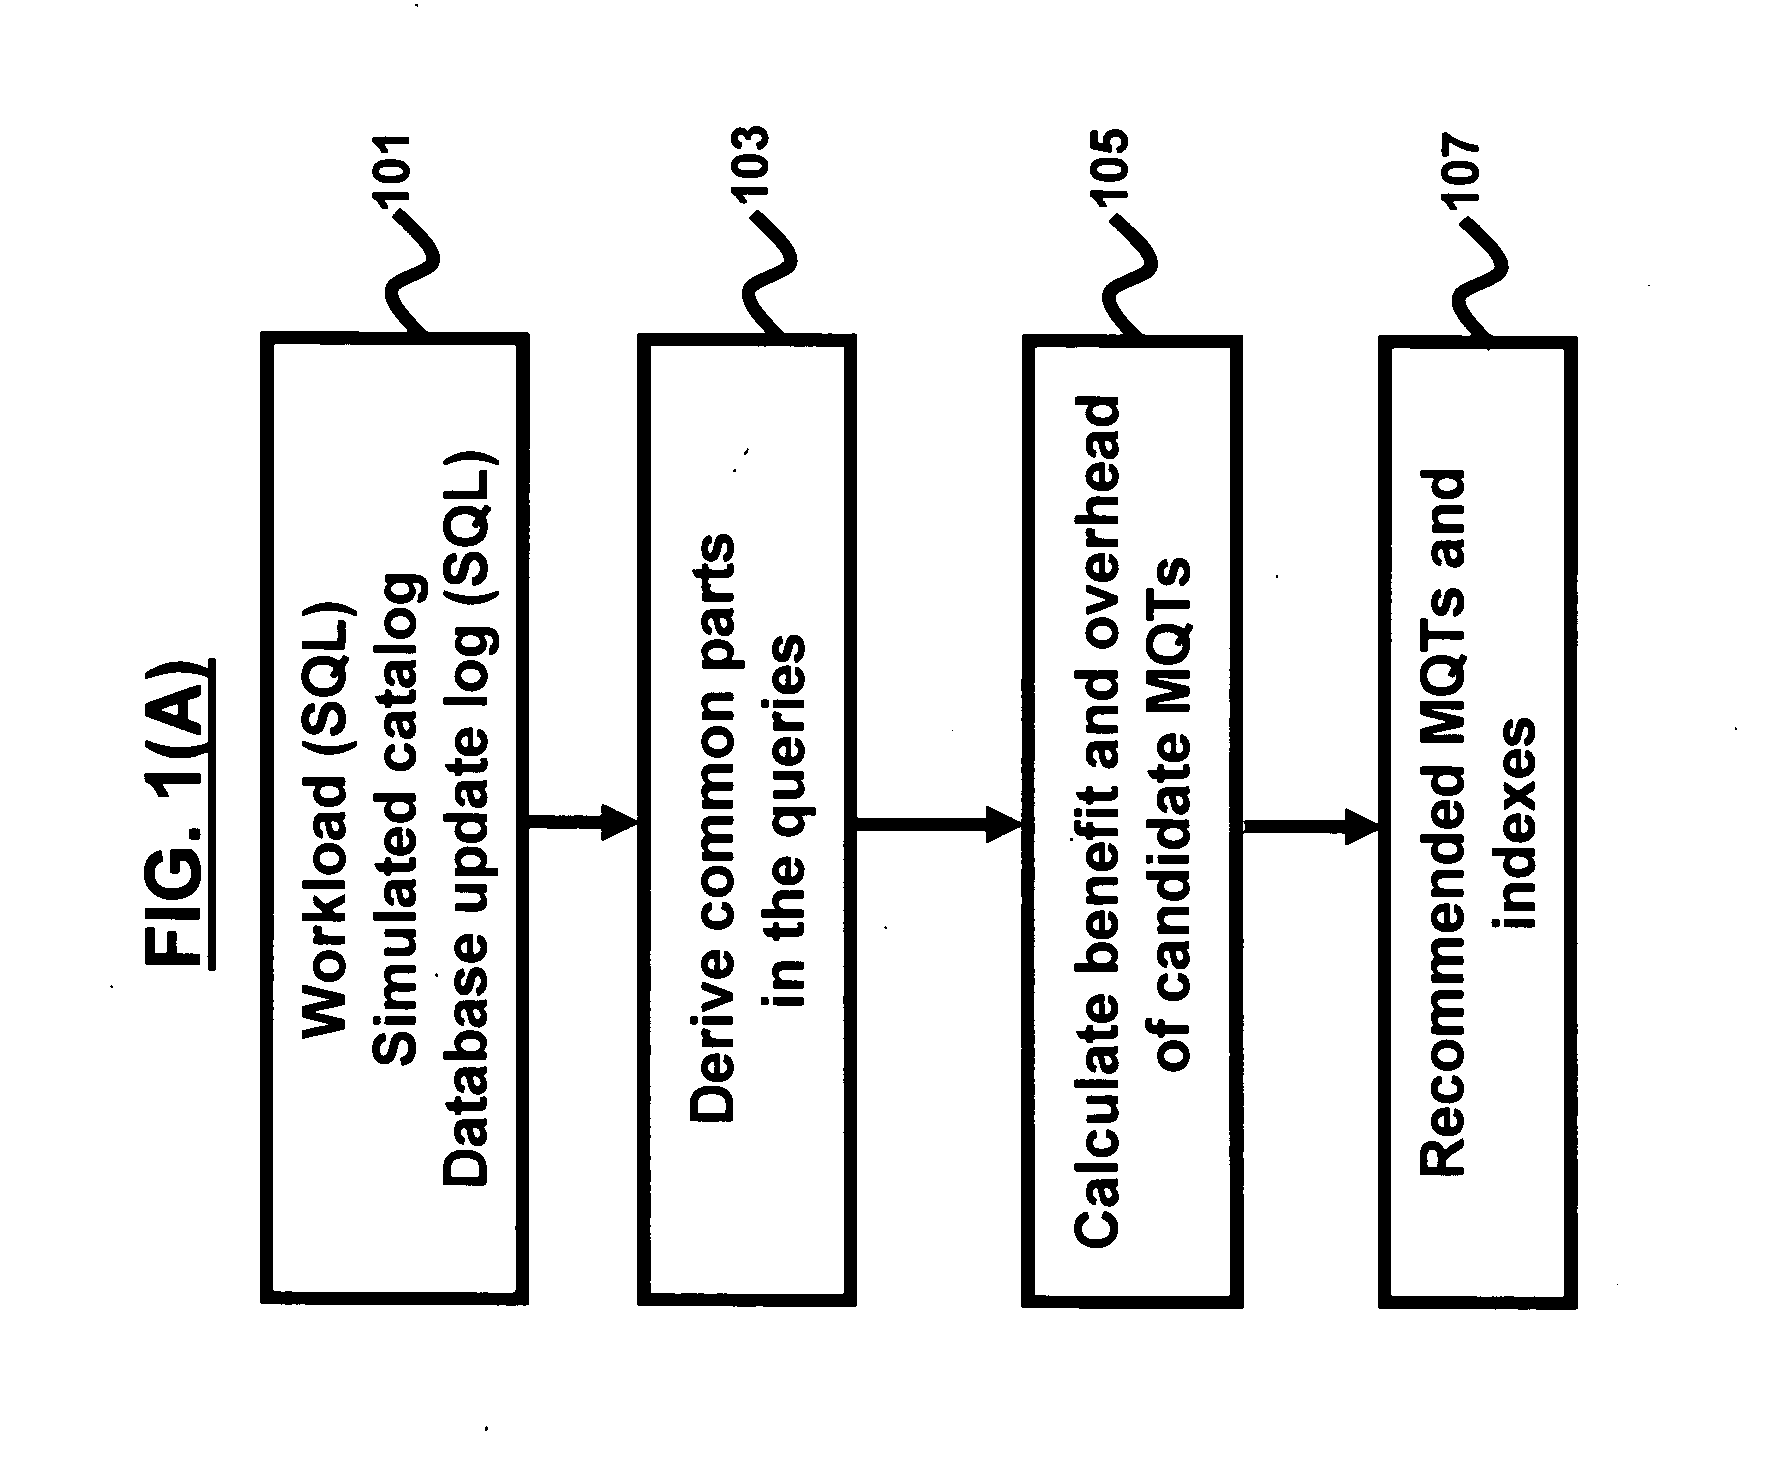 Autonomic recommendation and placement of materialized query tables for load distribution